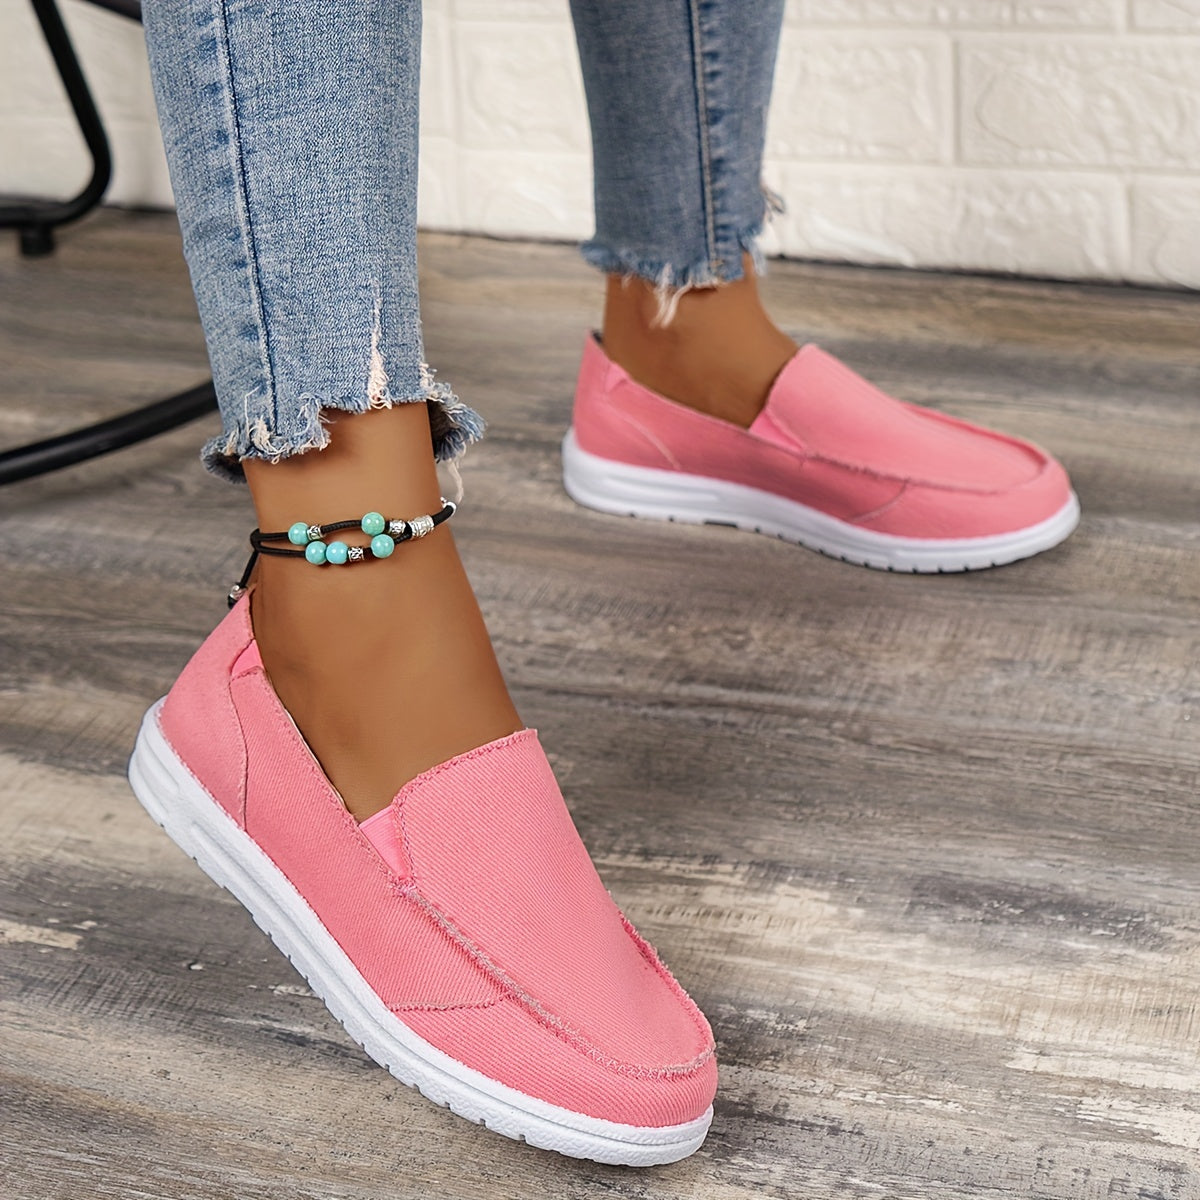 Women's Flat Canvas Shoes, Solid Color Round Toe Slip On Low Top Sneakers, Casual Walking Trainers